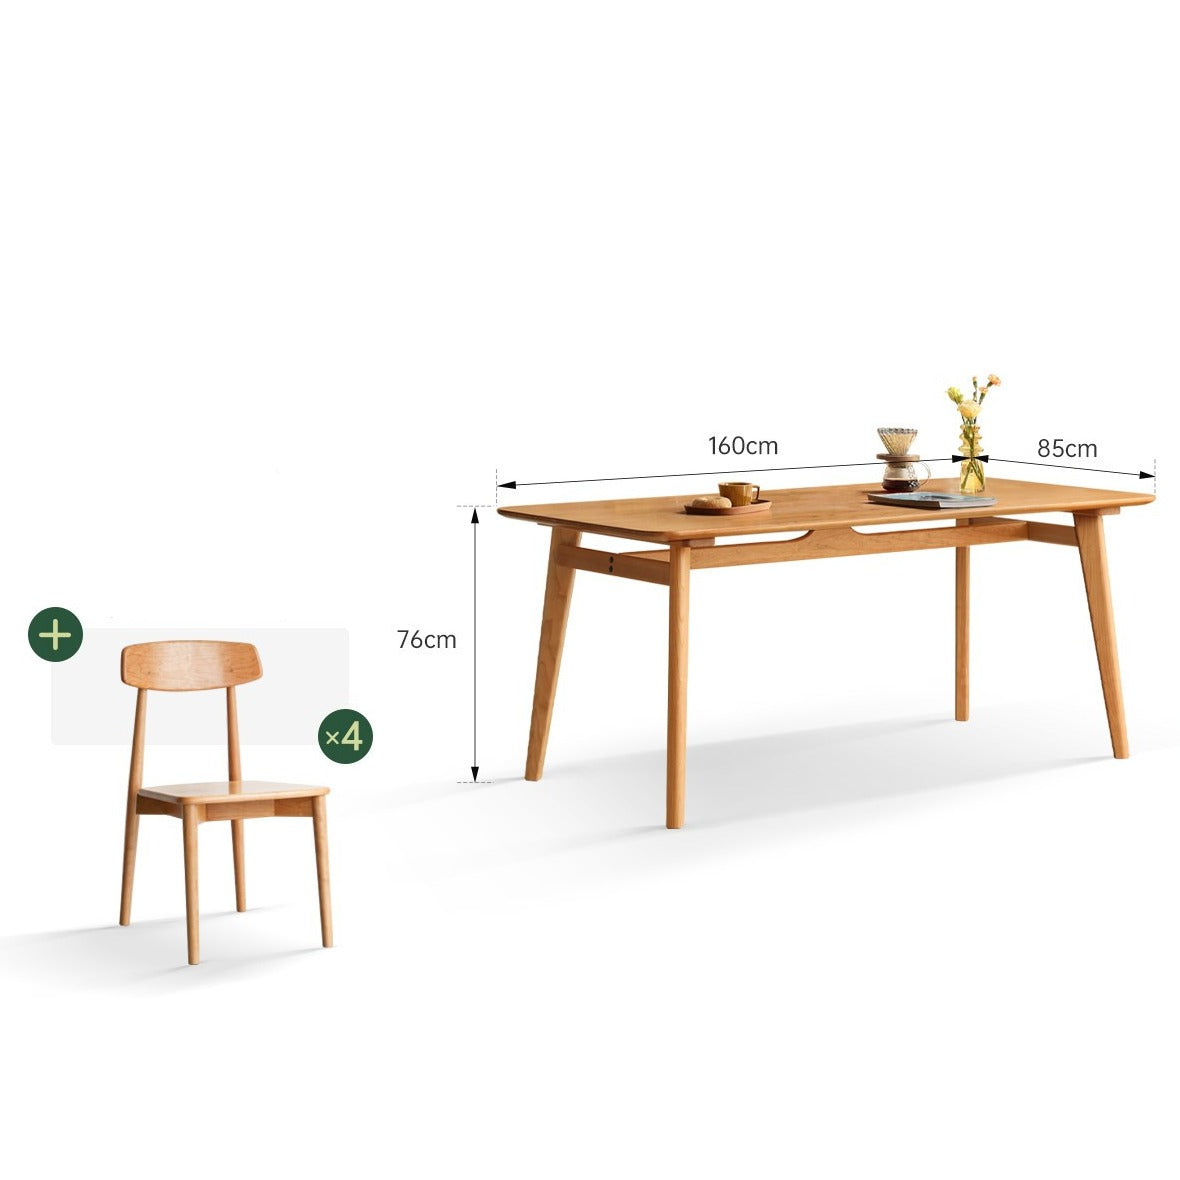 Cherry Wood Solid Wood Dining Table and Chair Combination